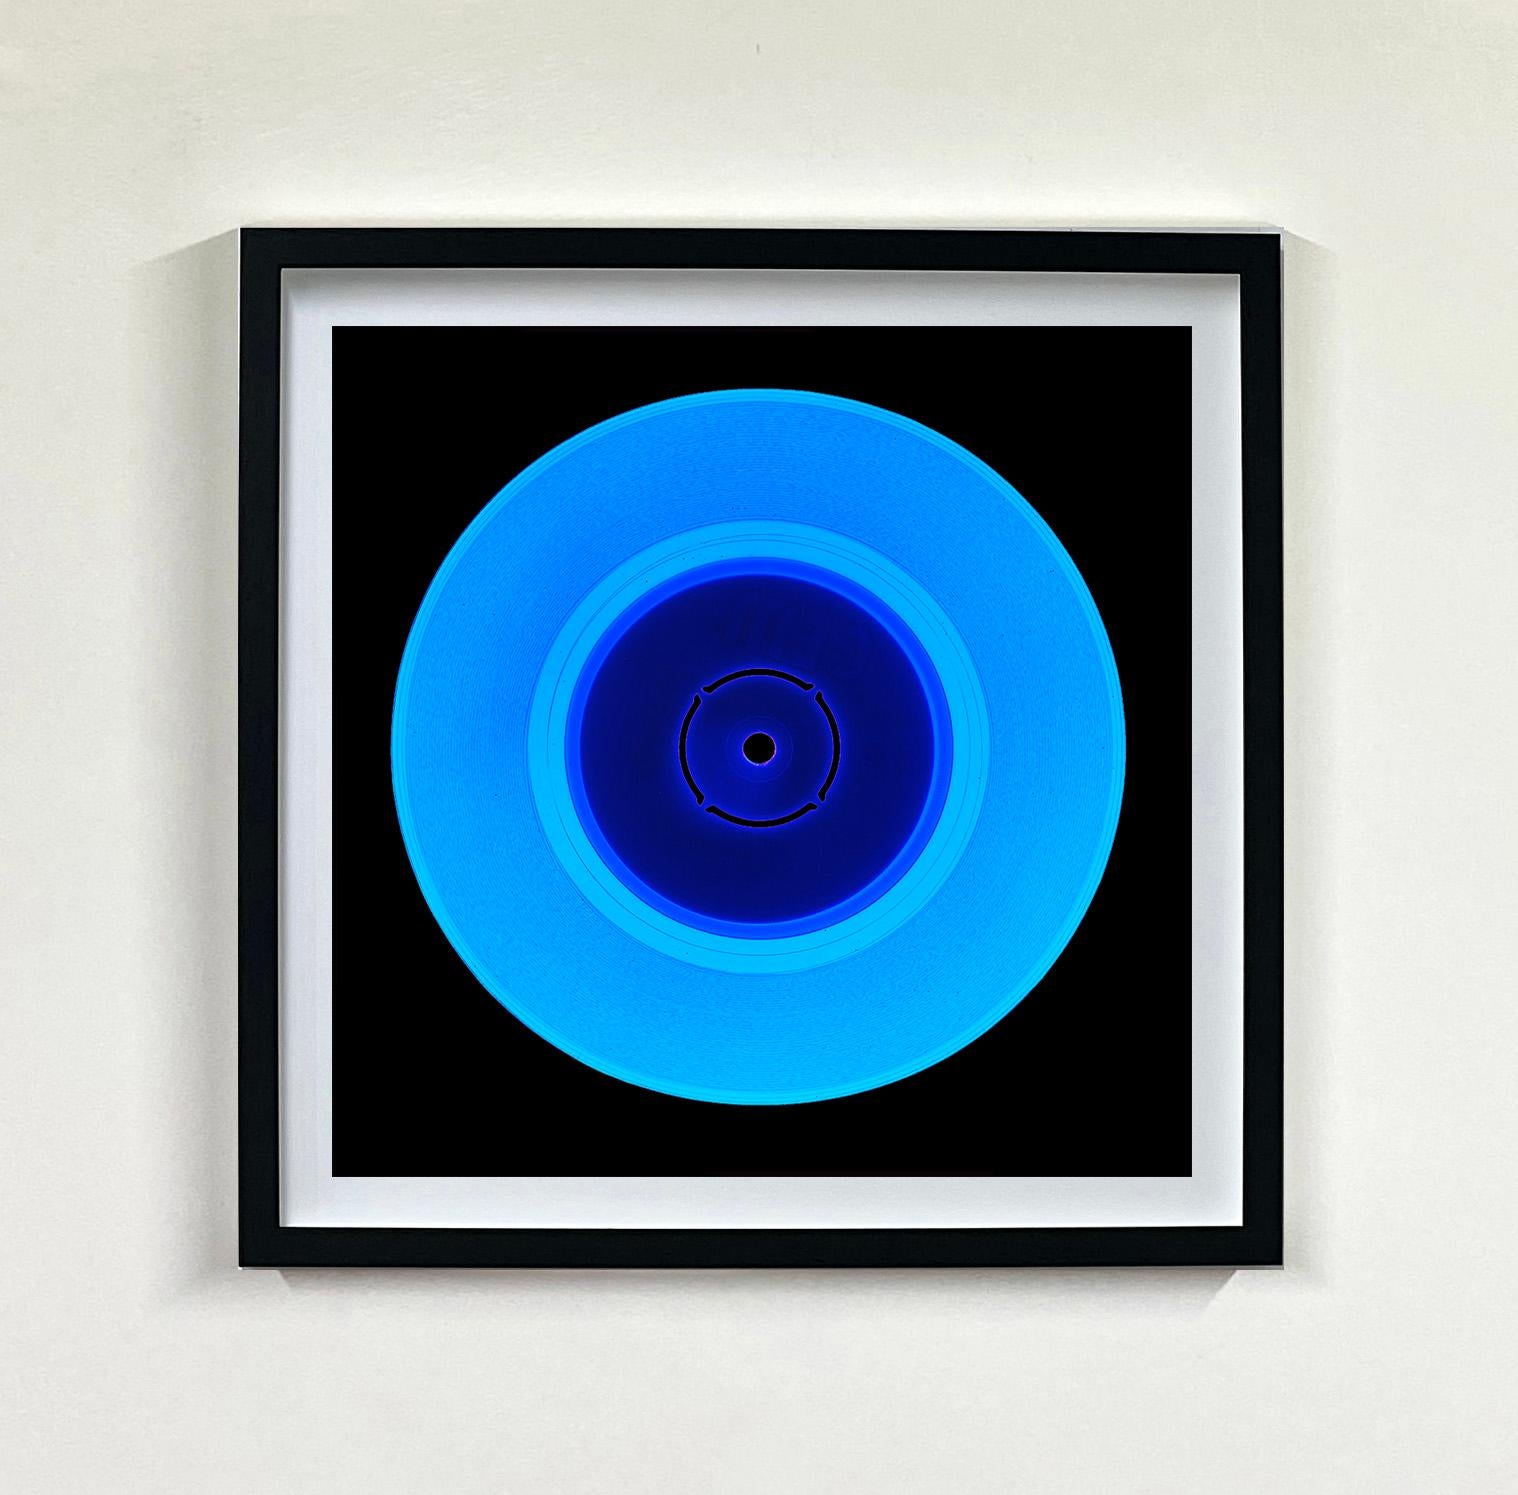 Heidler & Heeps Vinyl Collection Twelve Piece Multicolor Installation.
Acclaimed contemporary photographers, Richard Heeps and Natasha Heidler have collaborated to make this beautifully mesmerising collection. A celebration of the vinyl record and